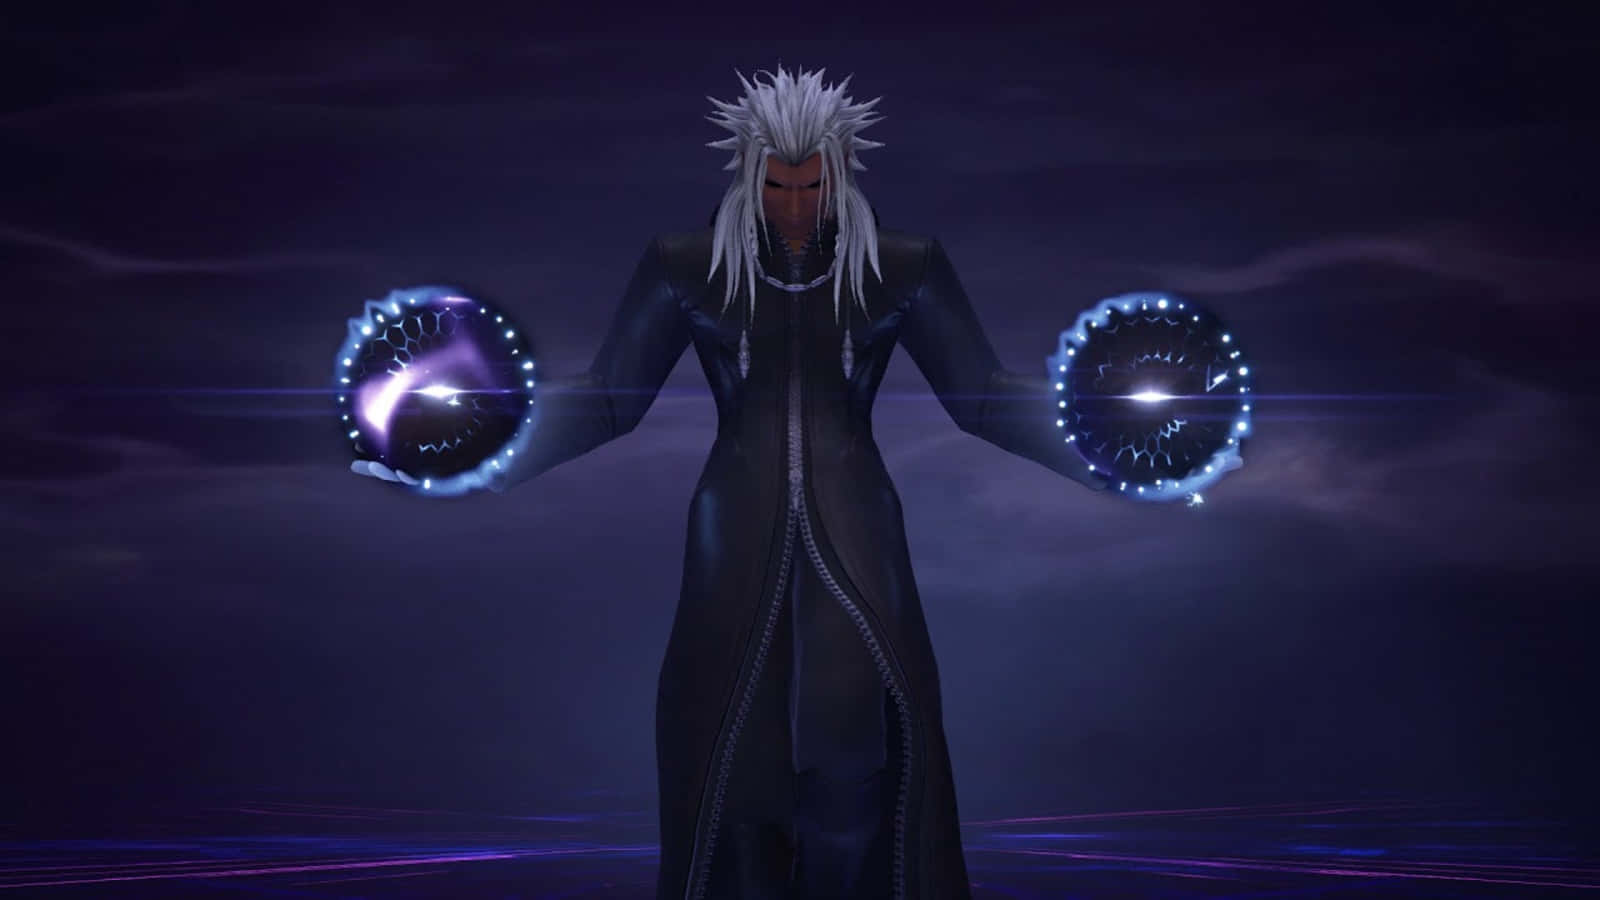 Xemnas, the enigmatic leader of Organization XIII, surrounded by his Nameless Swords in Kingdom Hearts Wallpaper